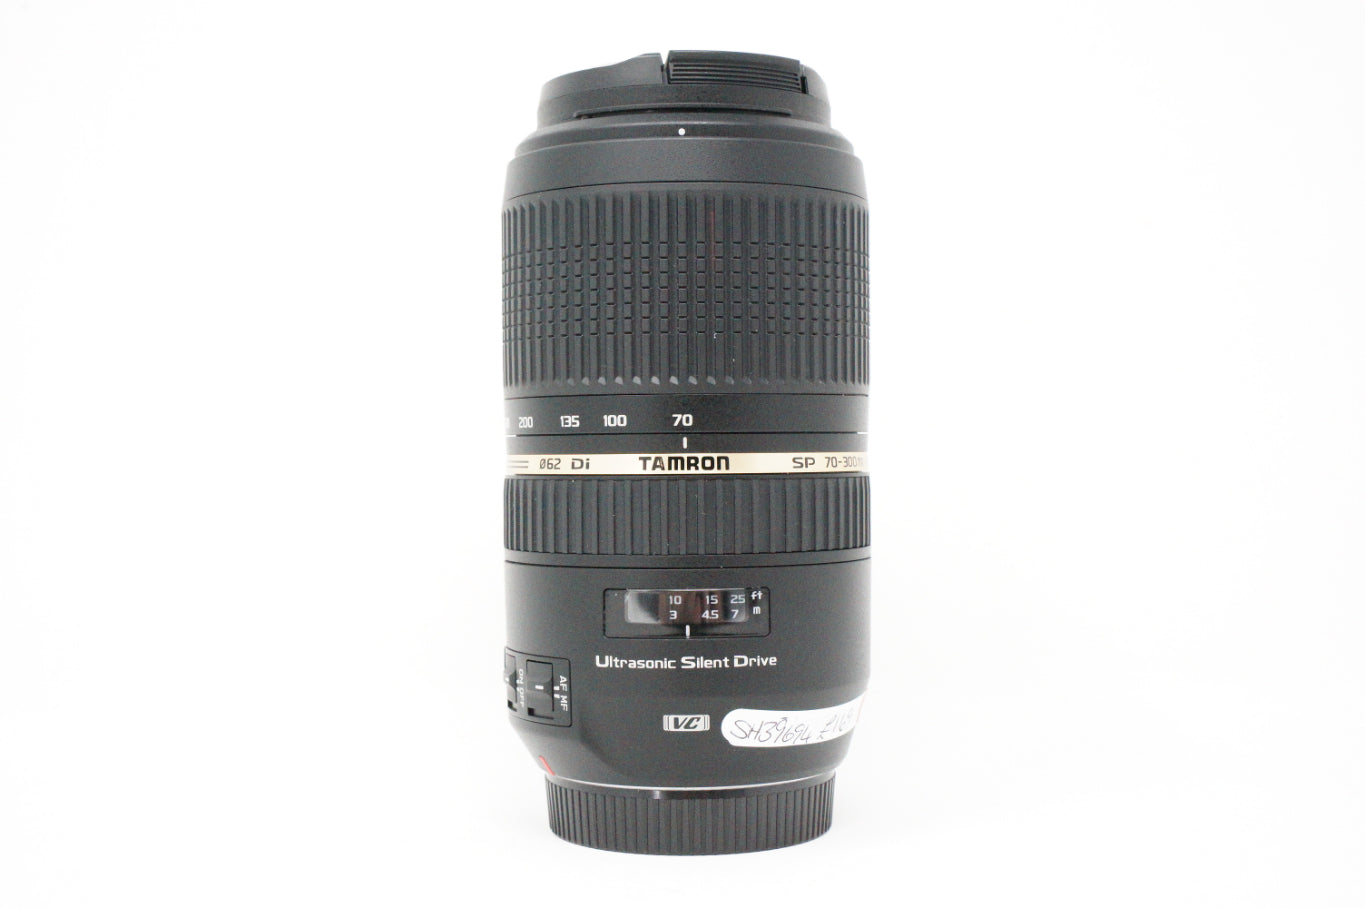 Used Tamron SP 70-300mm F4-5.6 Di VC lens in Canon EF mount